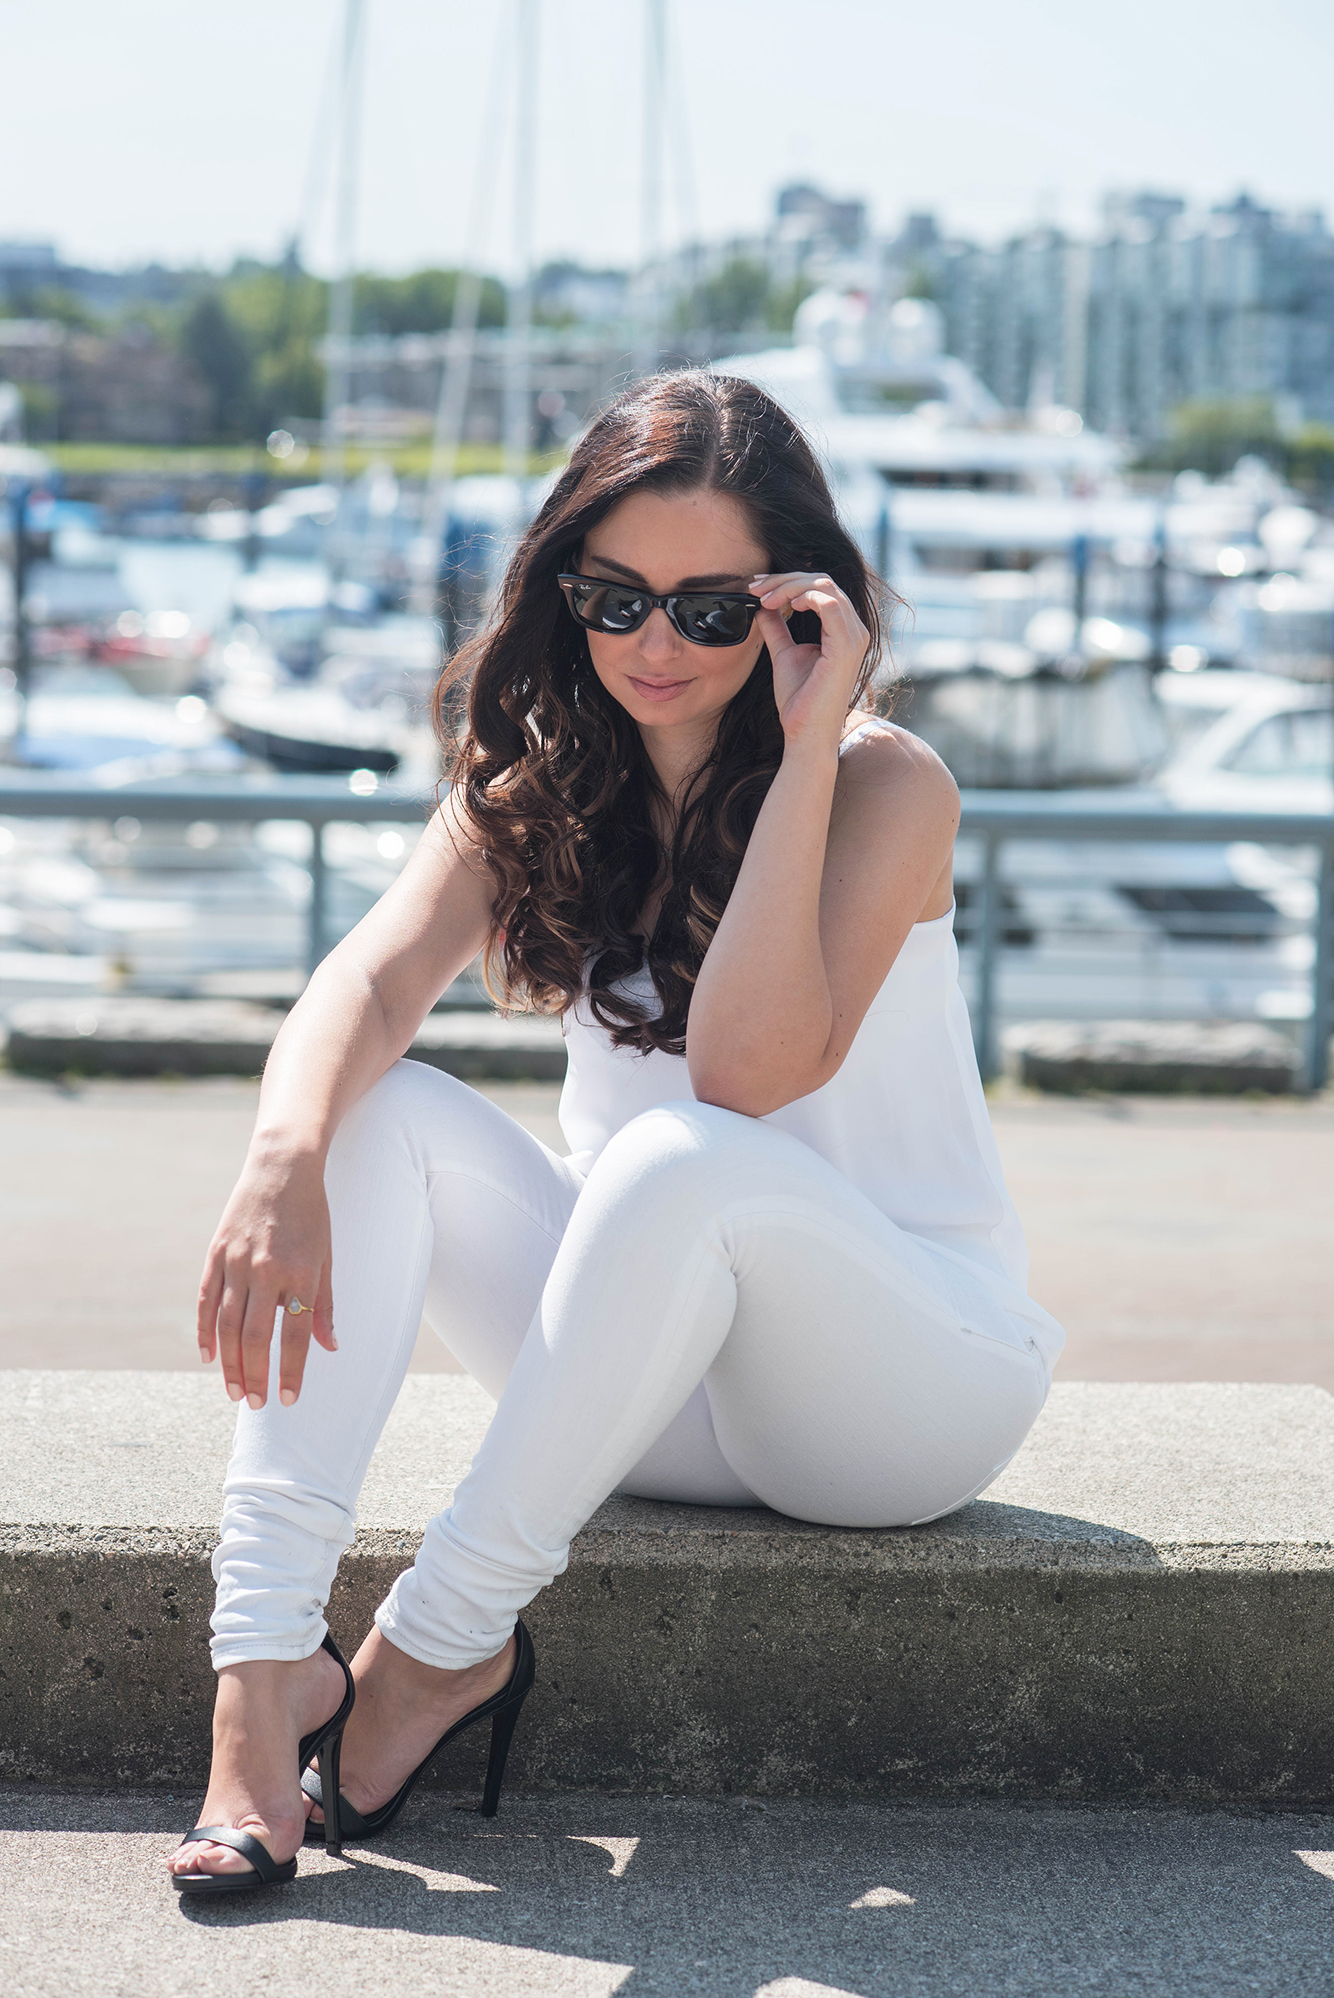 coco-and-vera-top-vancouver-style-blog-top-canadian-style-blog-top-blogger-street-style-all-white-everything-express-tank-mavi-jeans-steve-madden-sandals-rayban-sunglasses-leah-alexandra-jewelry